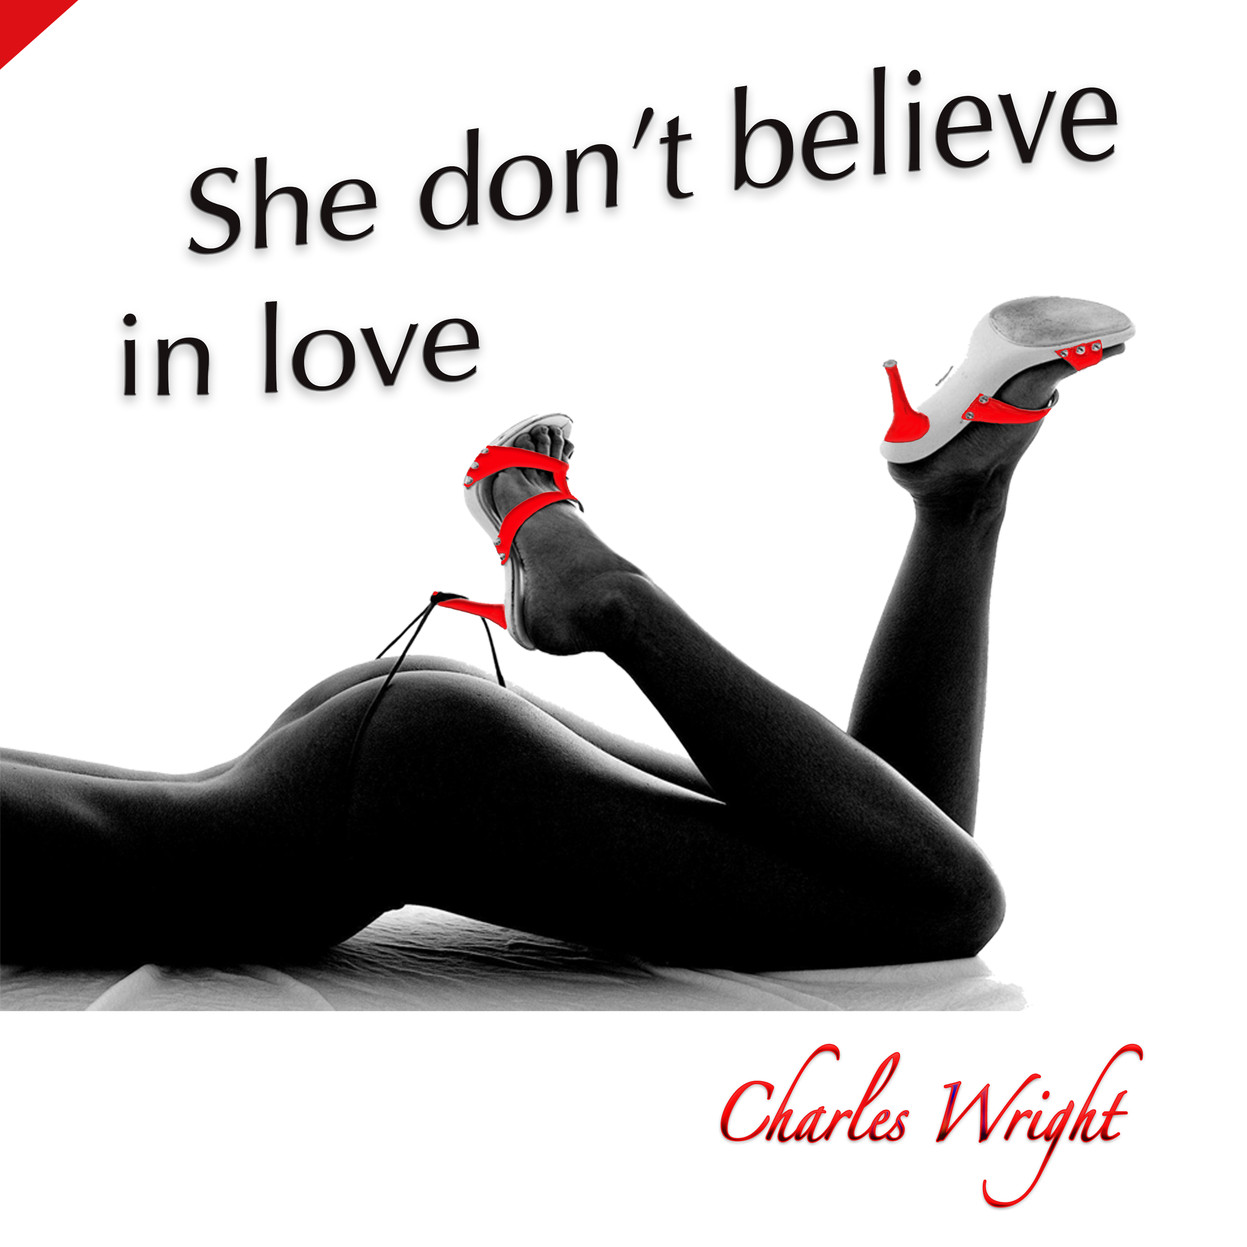  Charles Wright – “She Don’t Believe In Love”